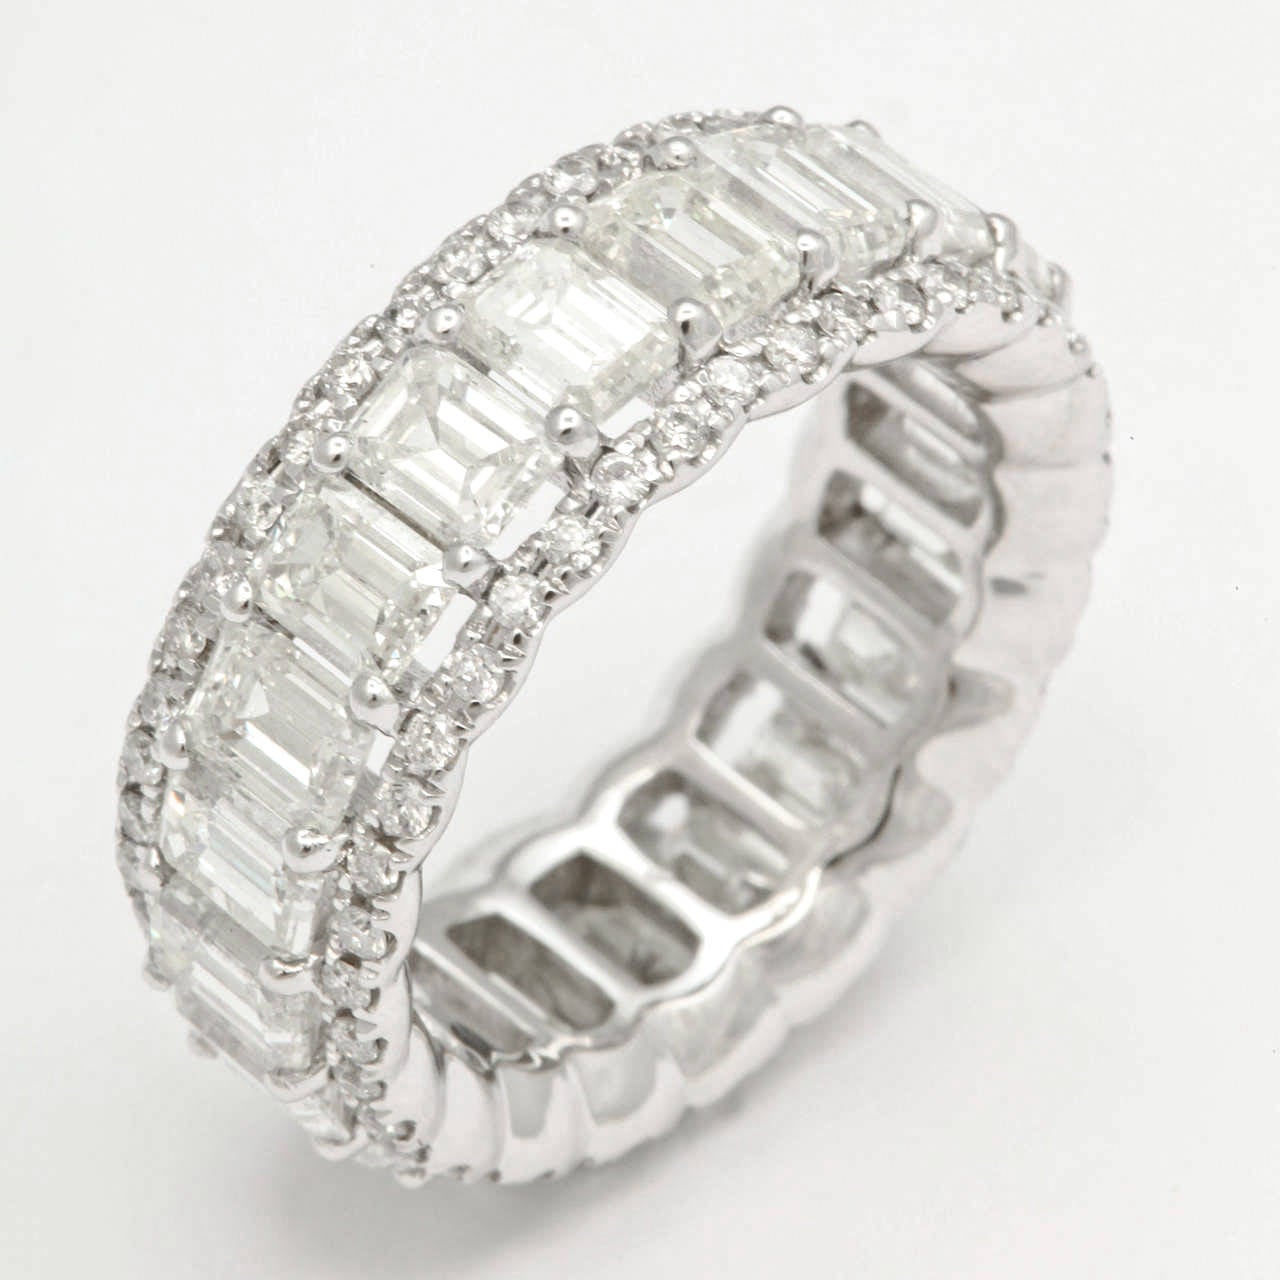 Absolutely stunning emerald cut eternity band, designed by Diana M. Jewels for Spring/Summer 2015 Collection.
This eternity band features 6.13 Carats of Diamonds. Set in 18KT White gold custom made setting. 
Available in different ring sizes and